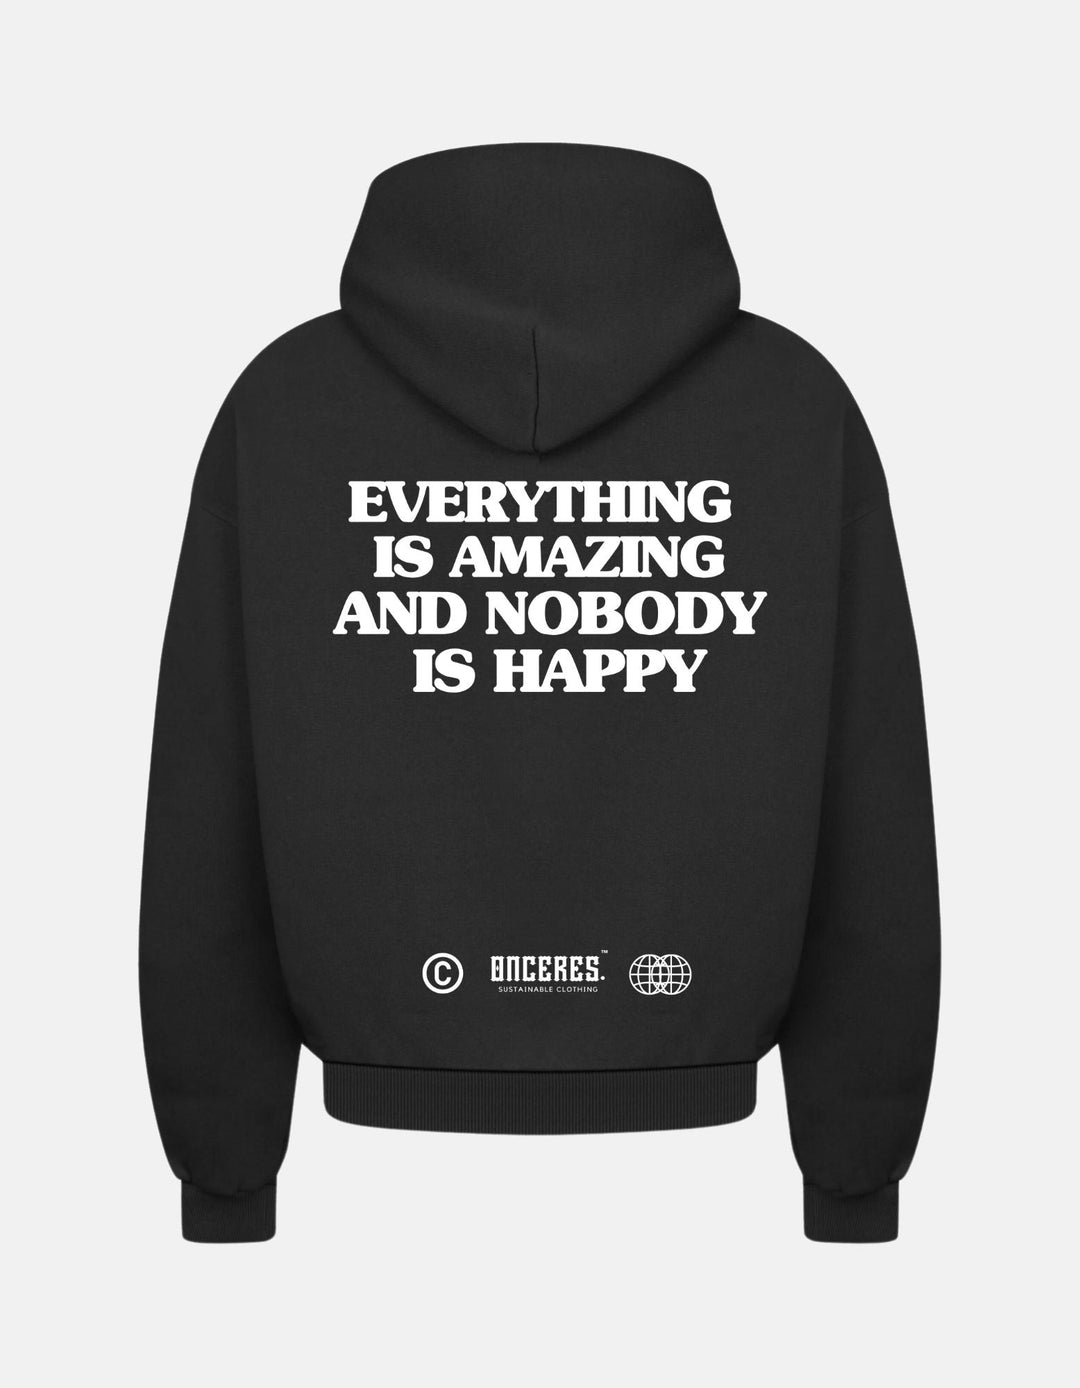 Everything is amazing [XL] - Onceres™